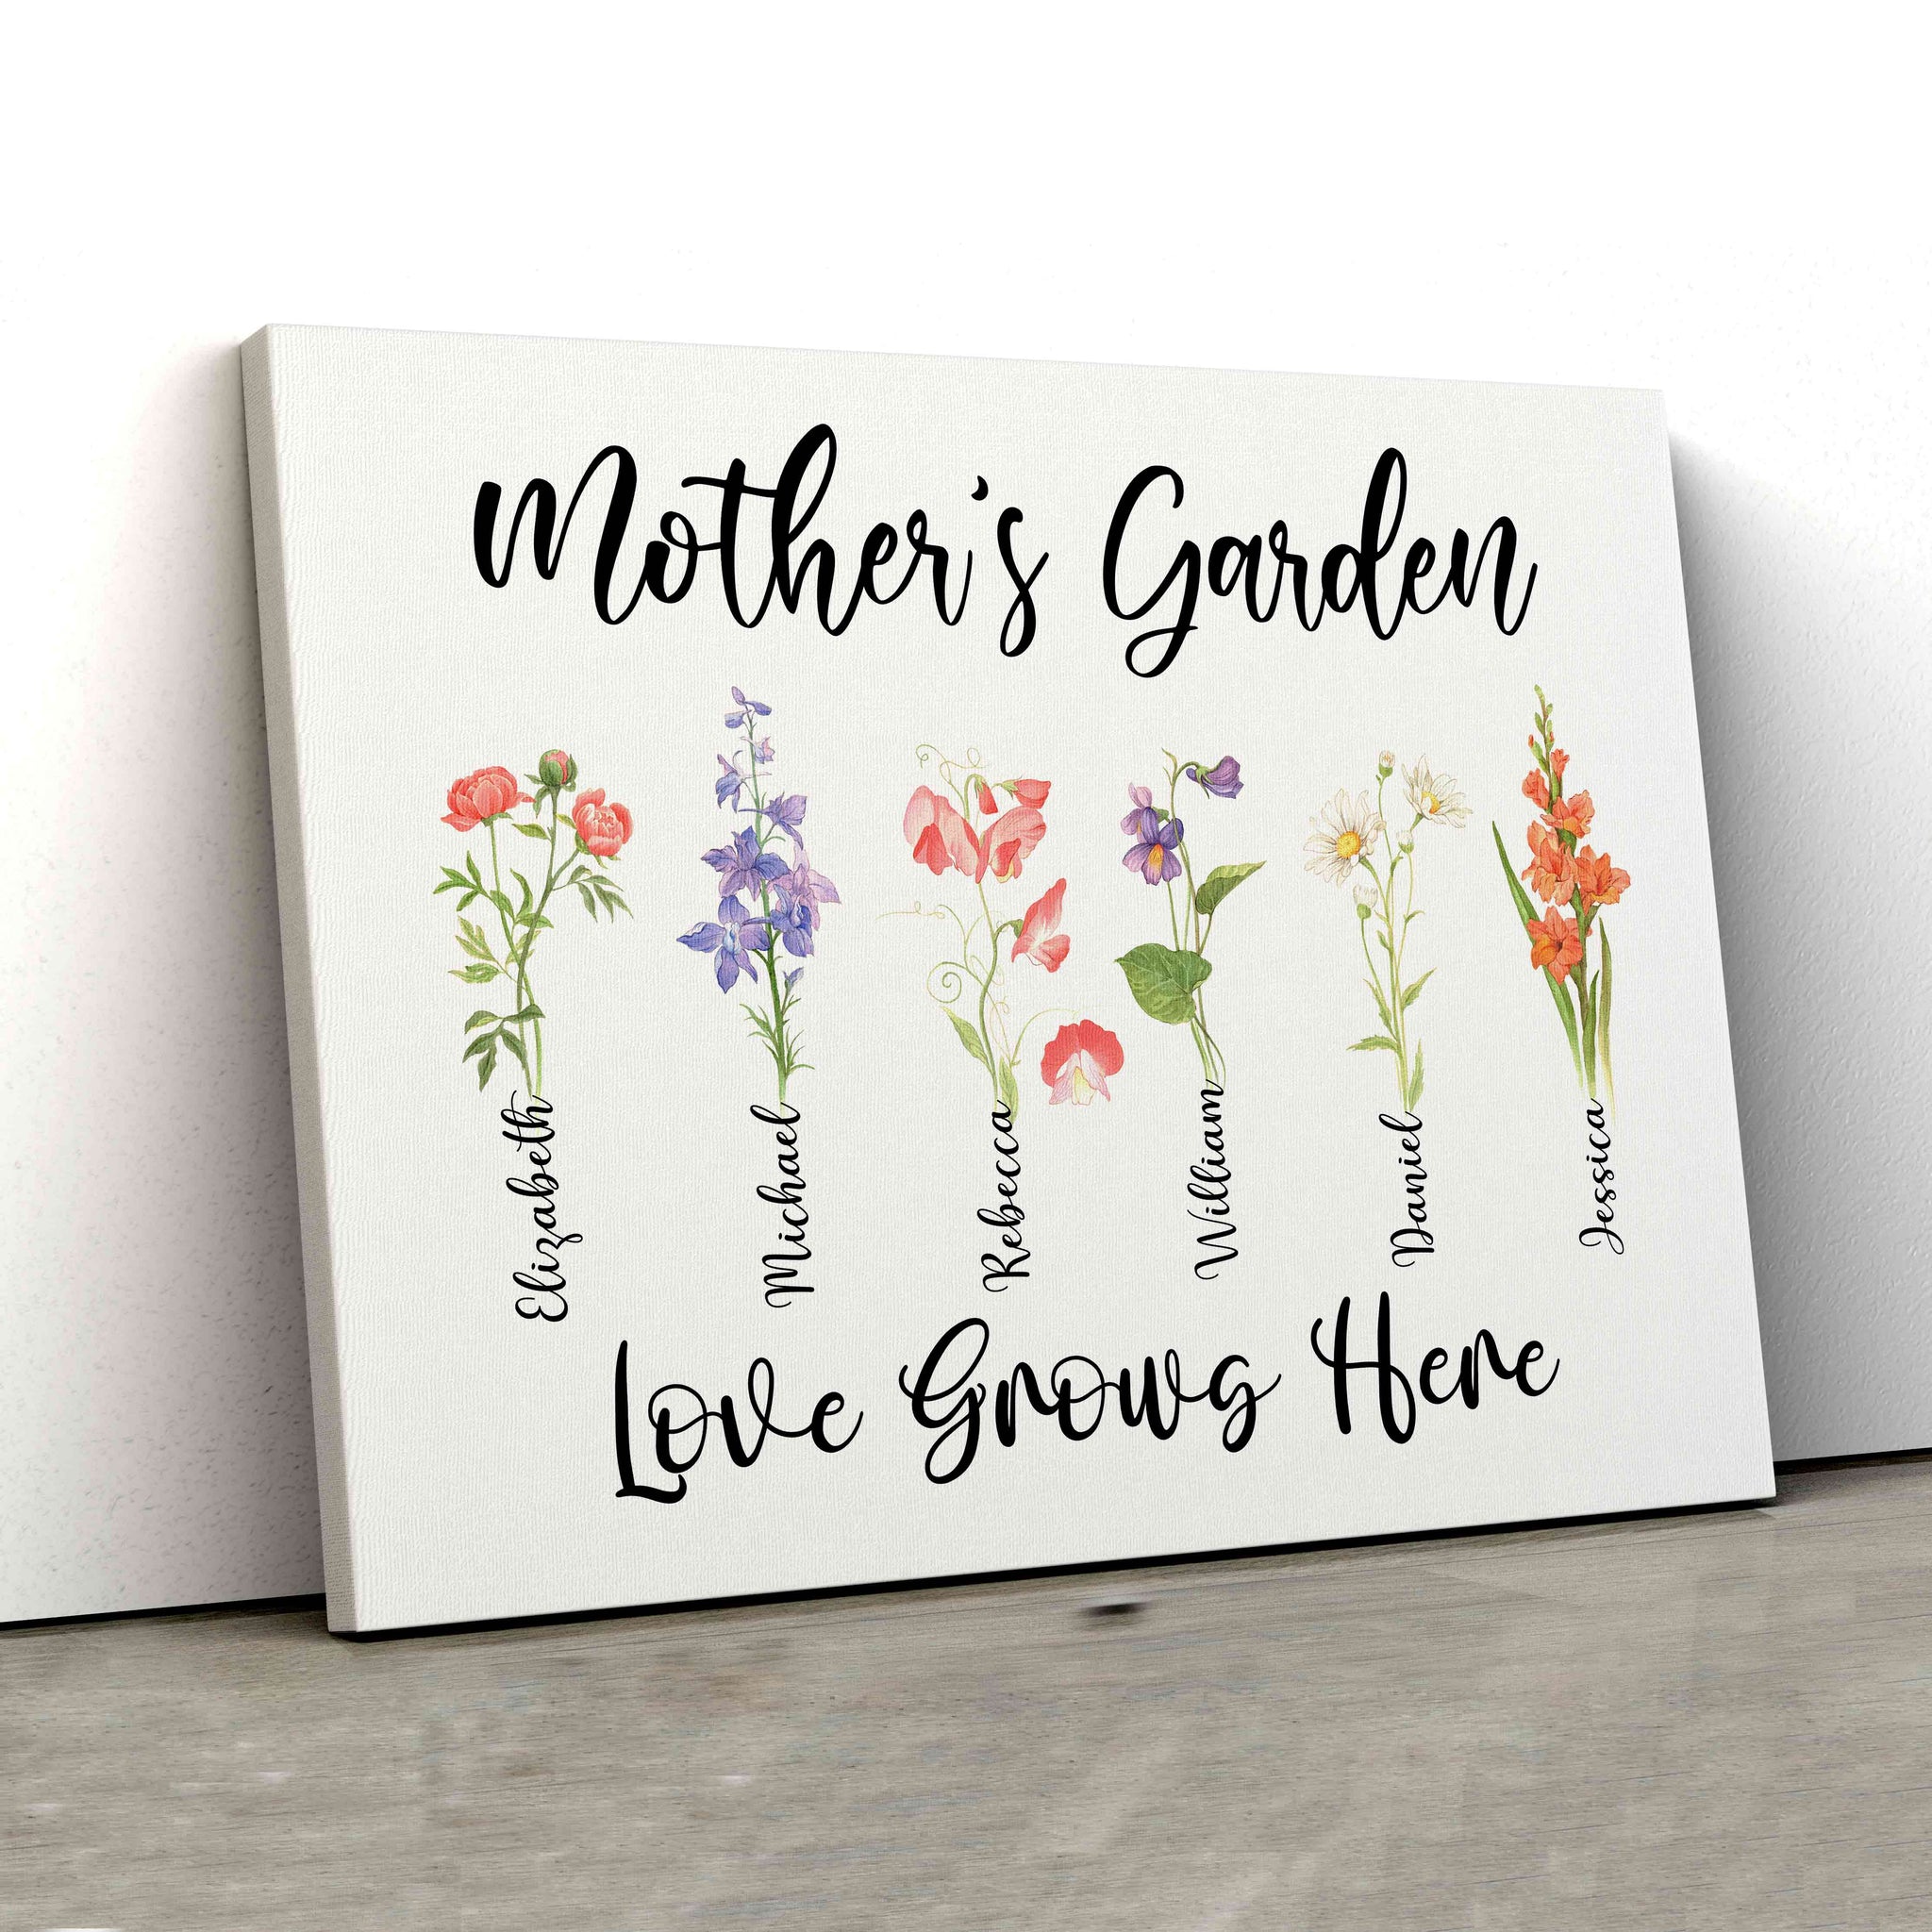 Mother's Garden Canvas, Birth Month Flower Canvas Design, Gift For Grandmother, Mother's Day Gifts, Personalized Gifts Idea For Grandma